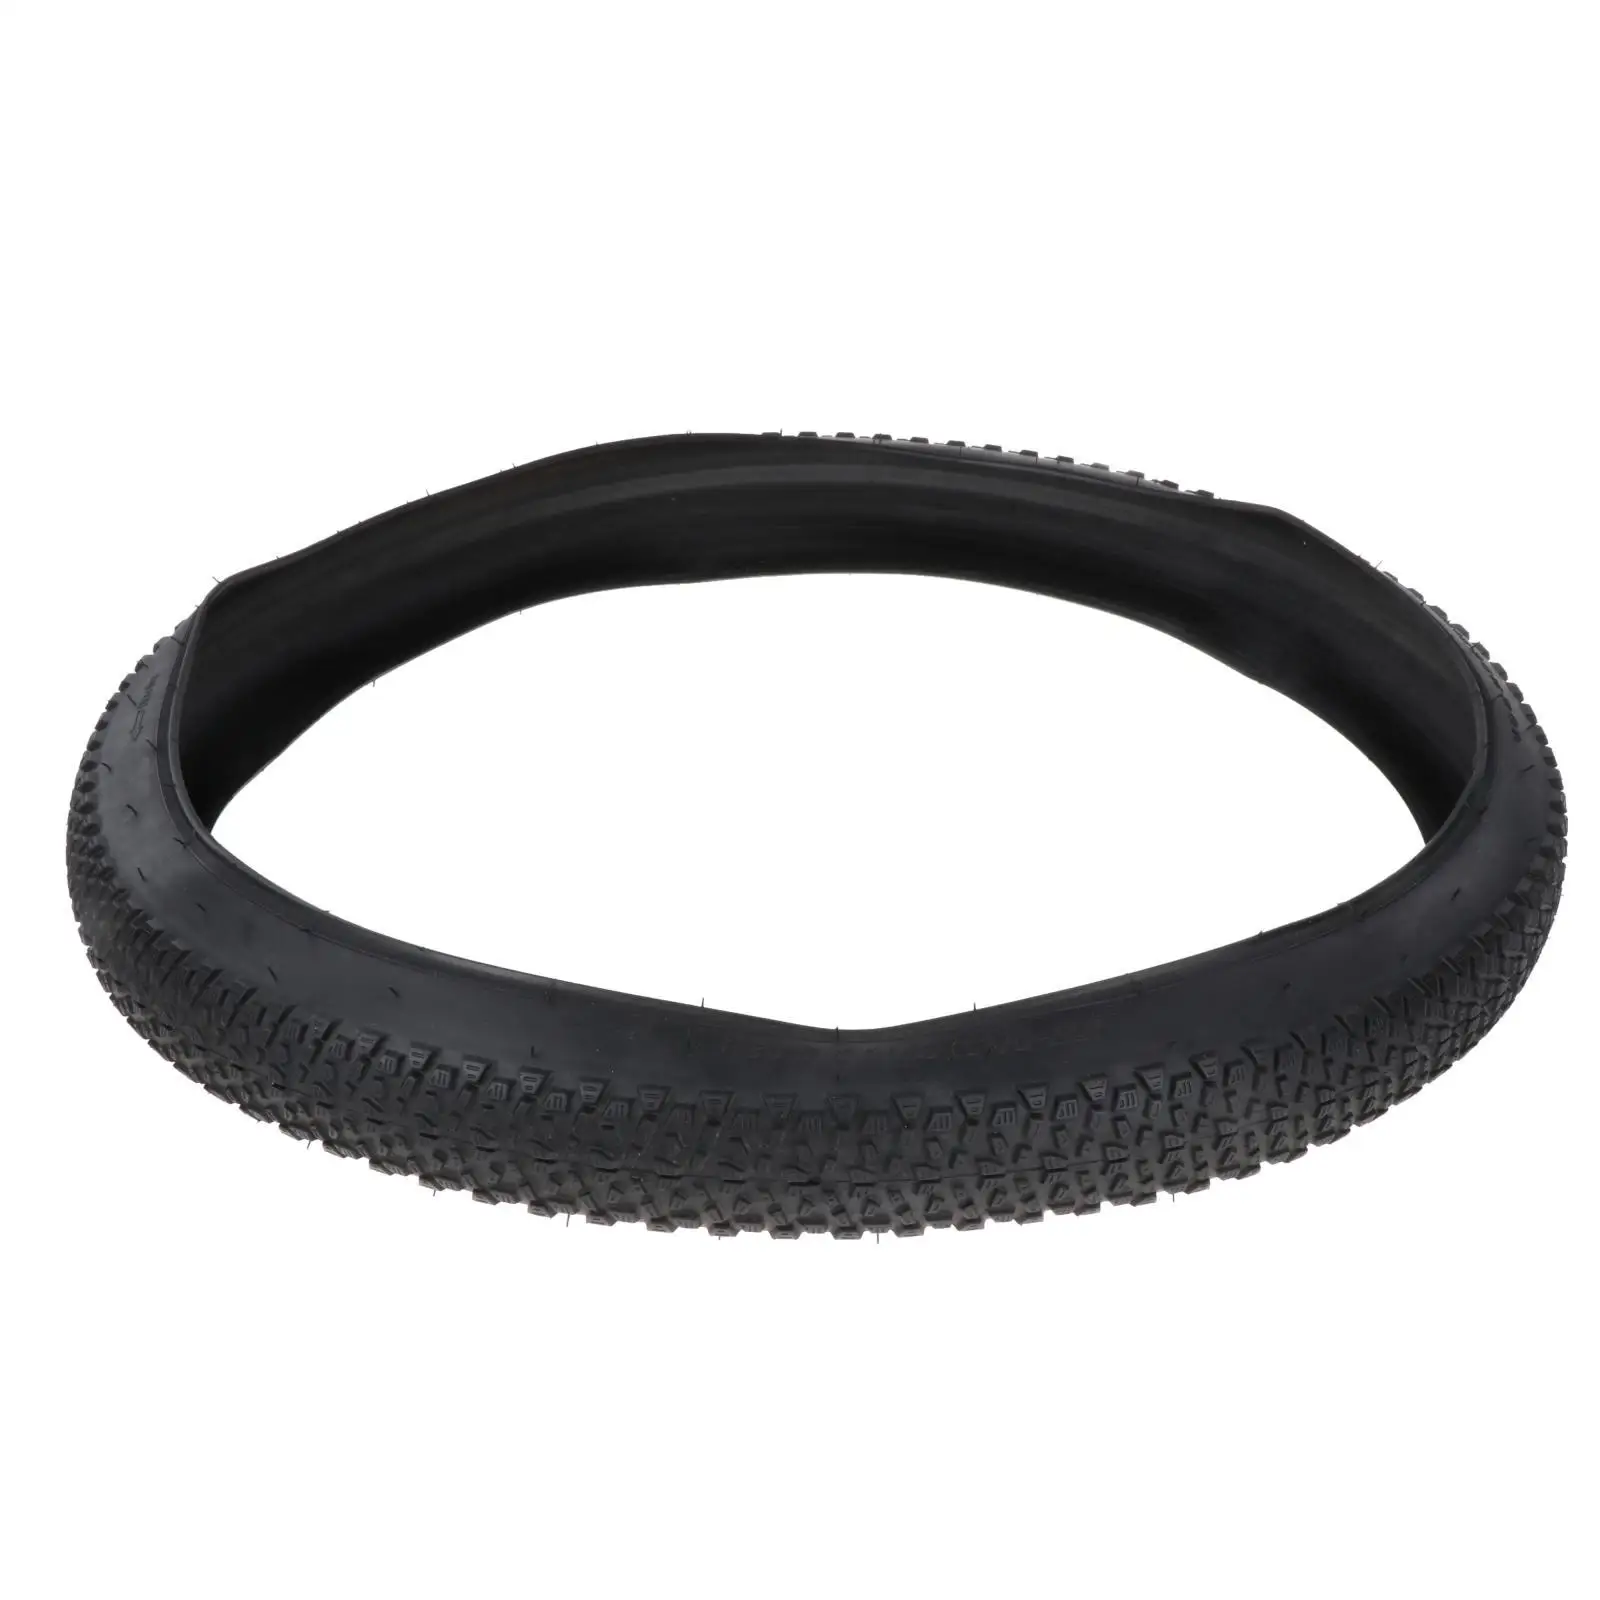  Outer Tyre Portable Traction Puncture Proof Replaceable for Bike